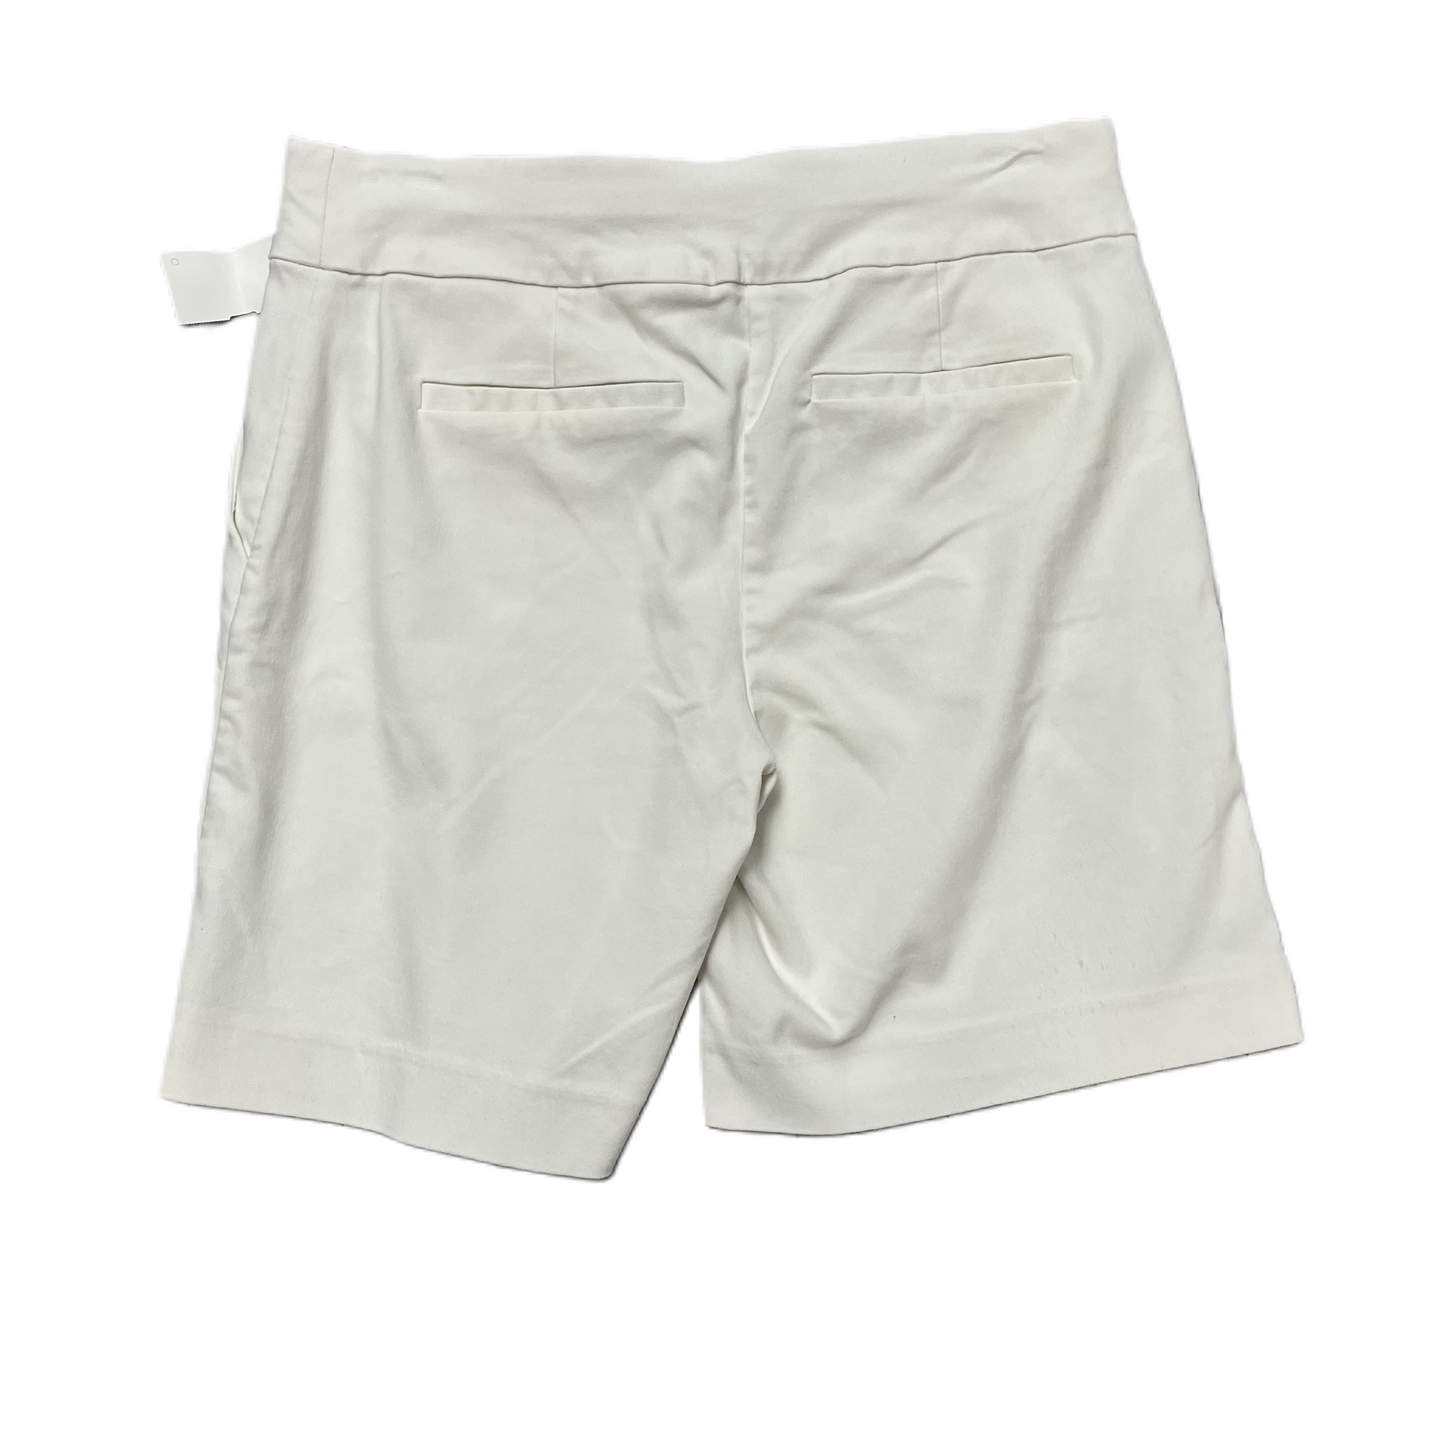 Shorts By New York And Co  Size: M